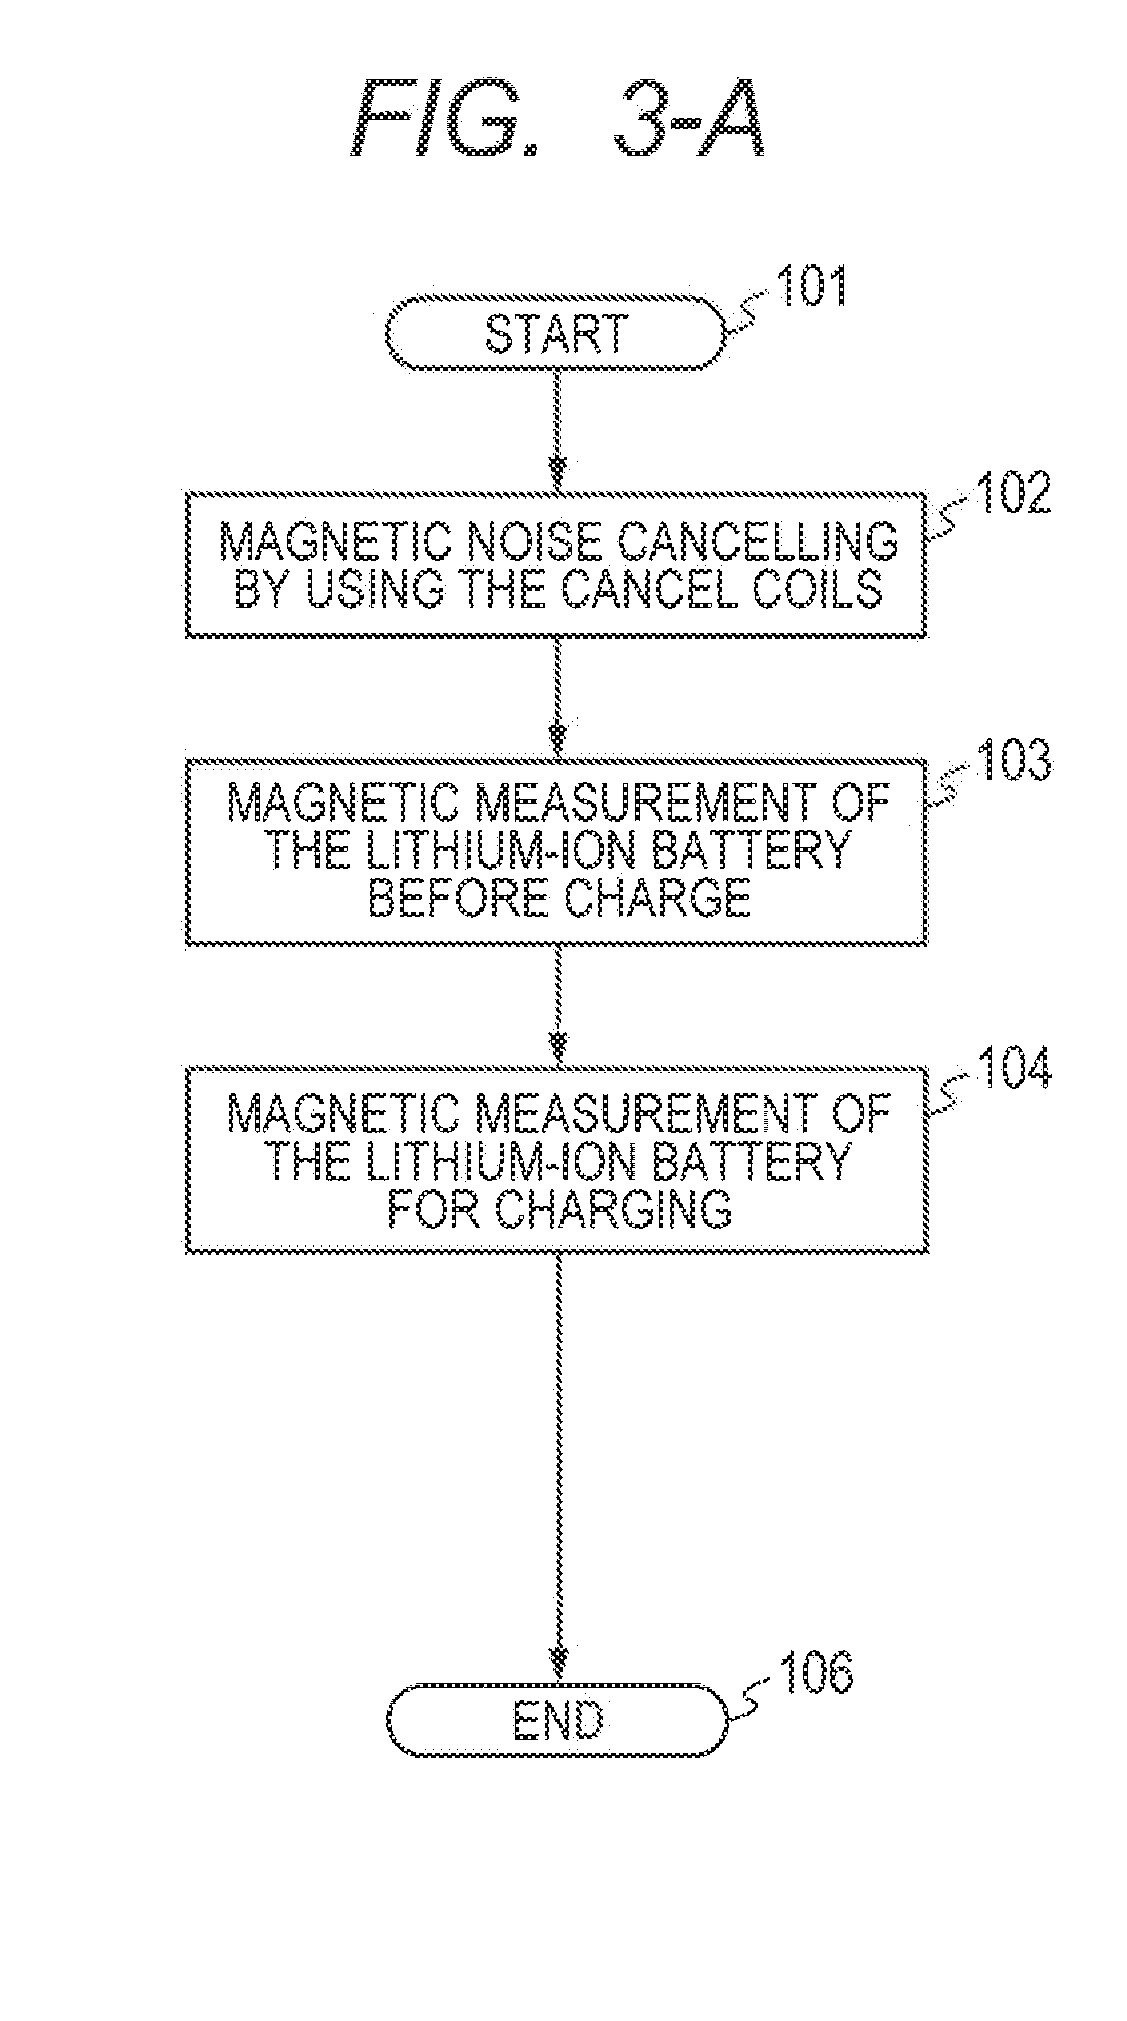 Magnetic measurement system and method for measuring magnetic field